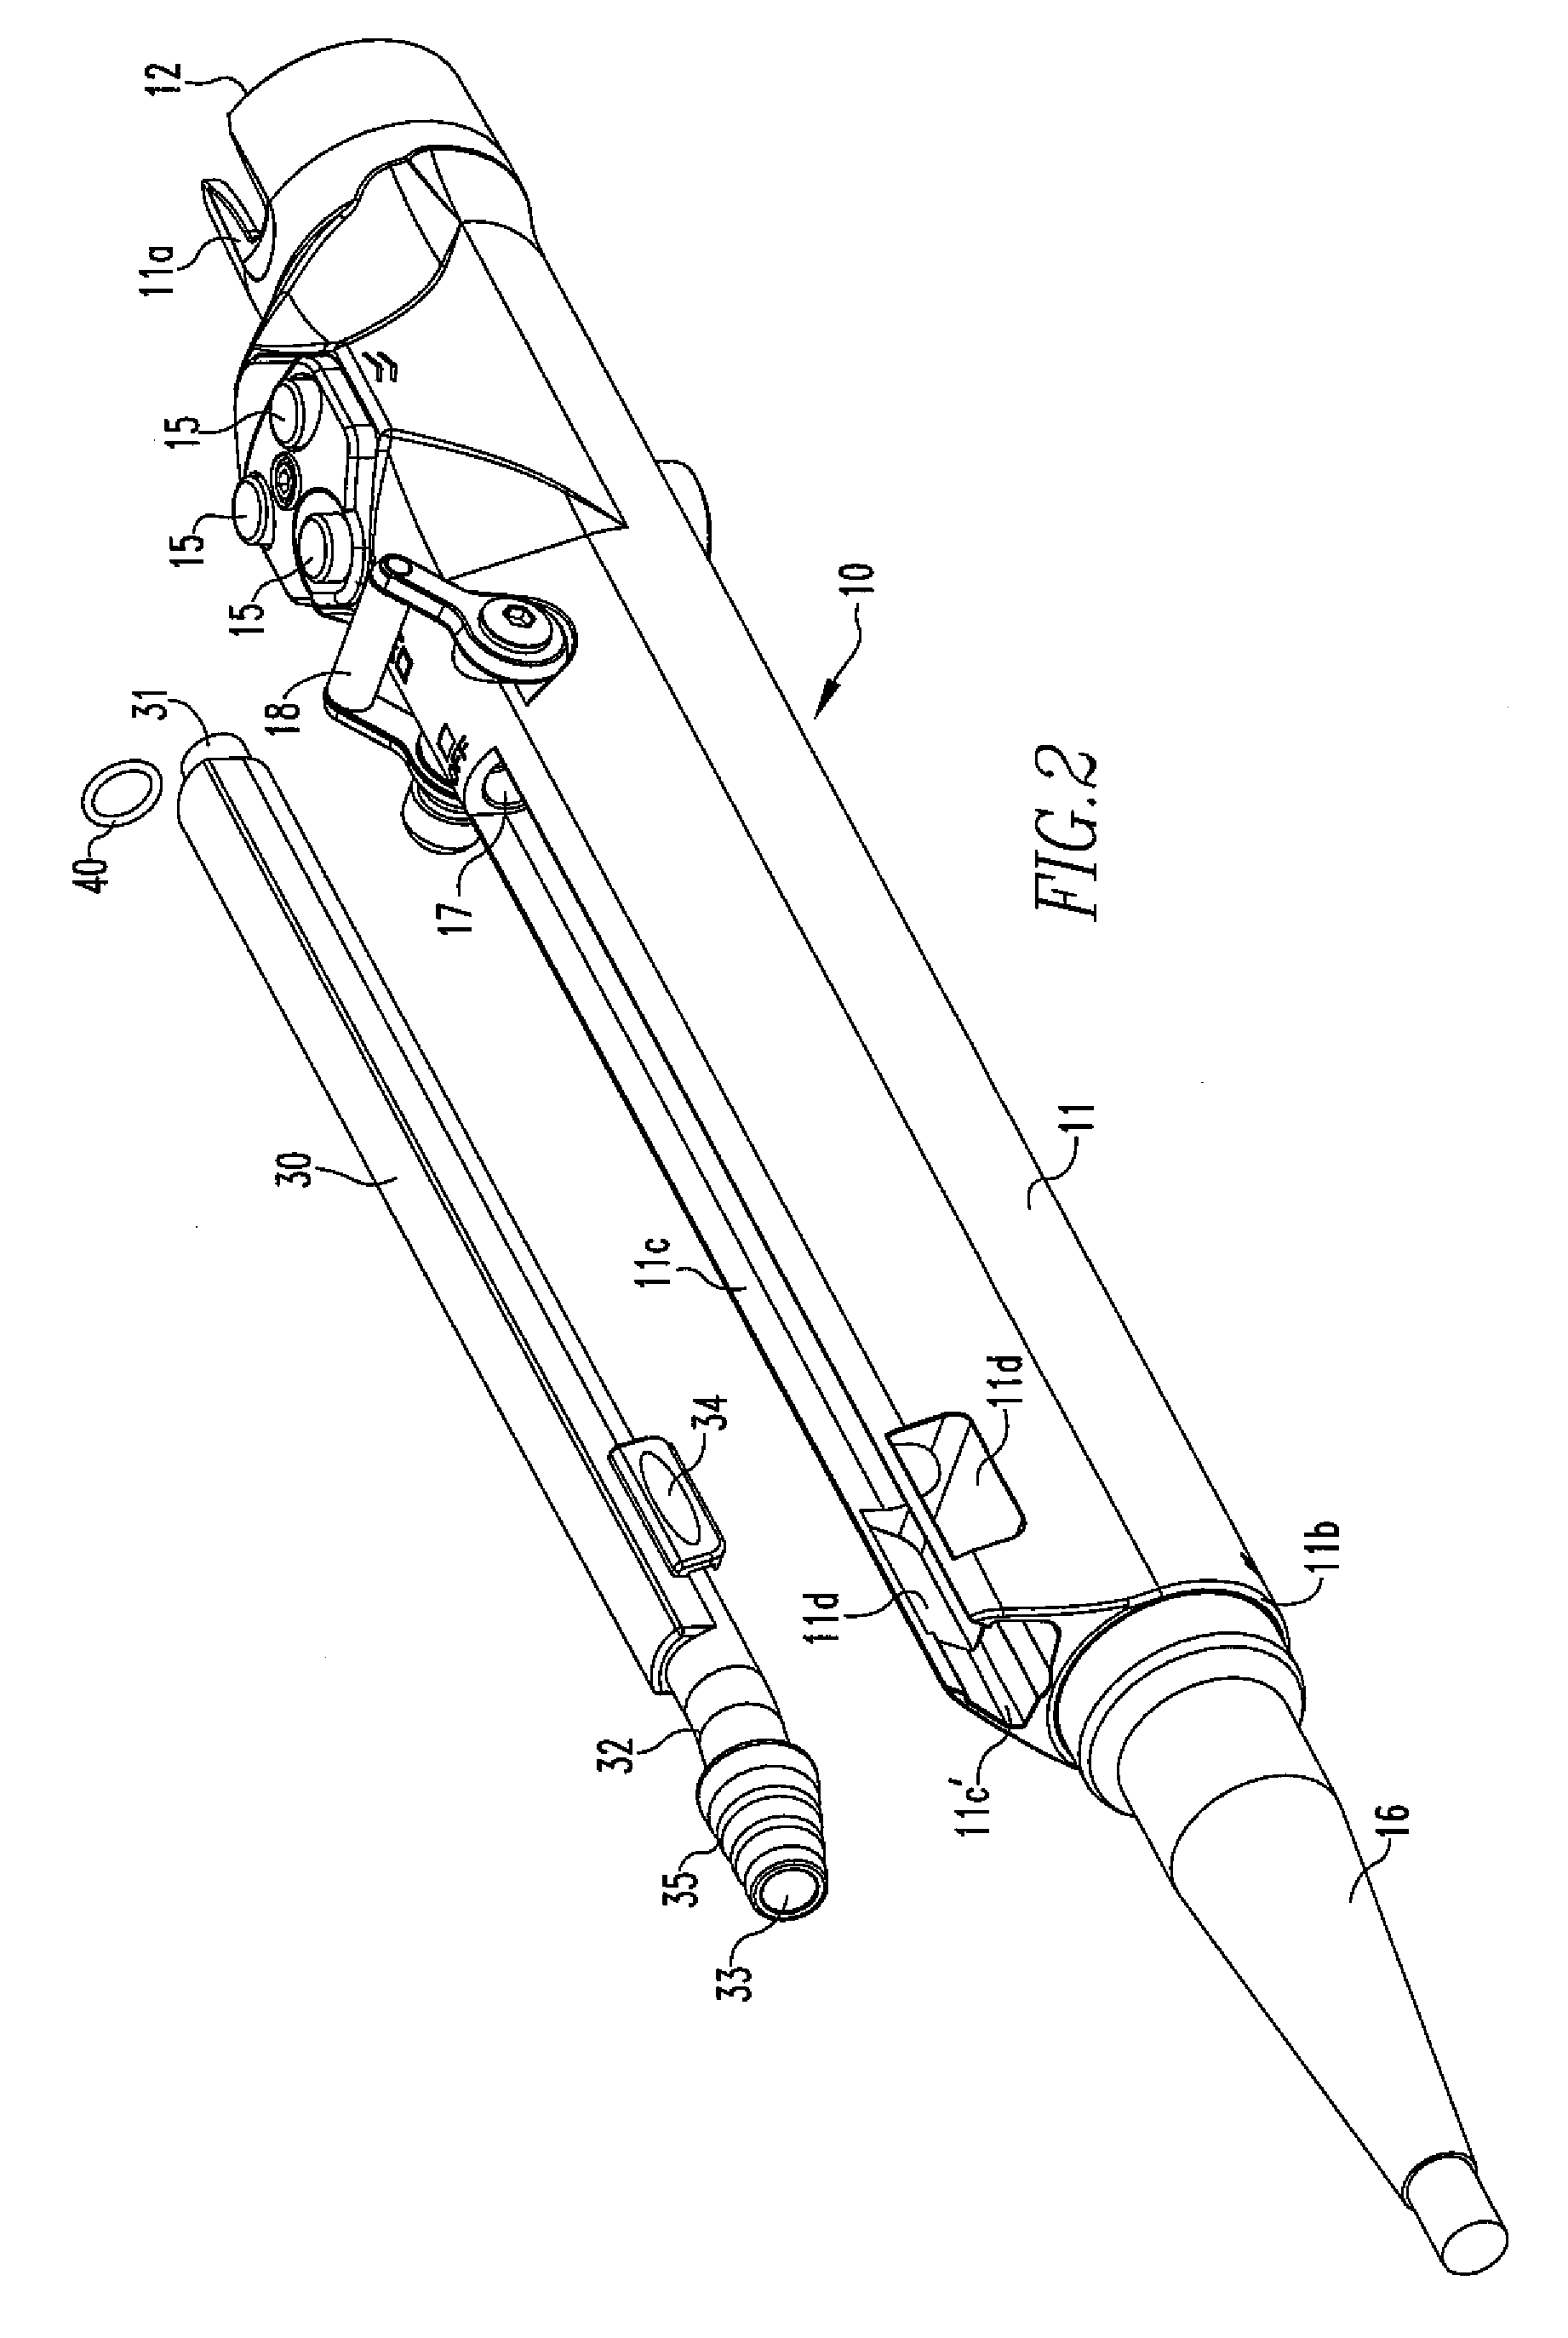 Surgical handpiece for endoscopic resection